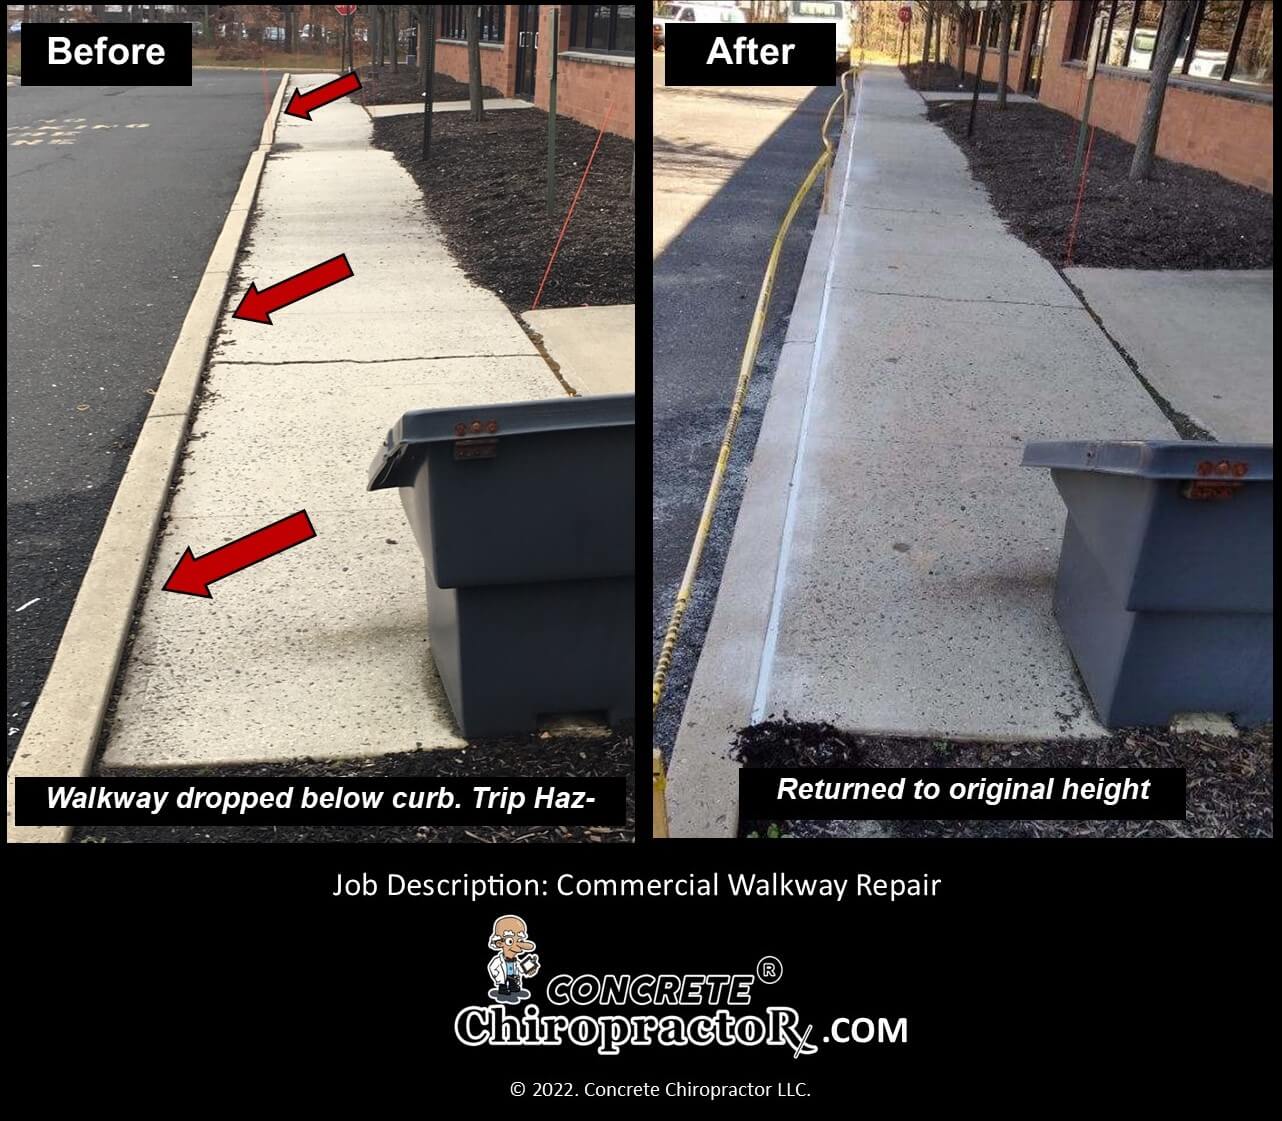 Before and After Photos, Concrete Chiropractor